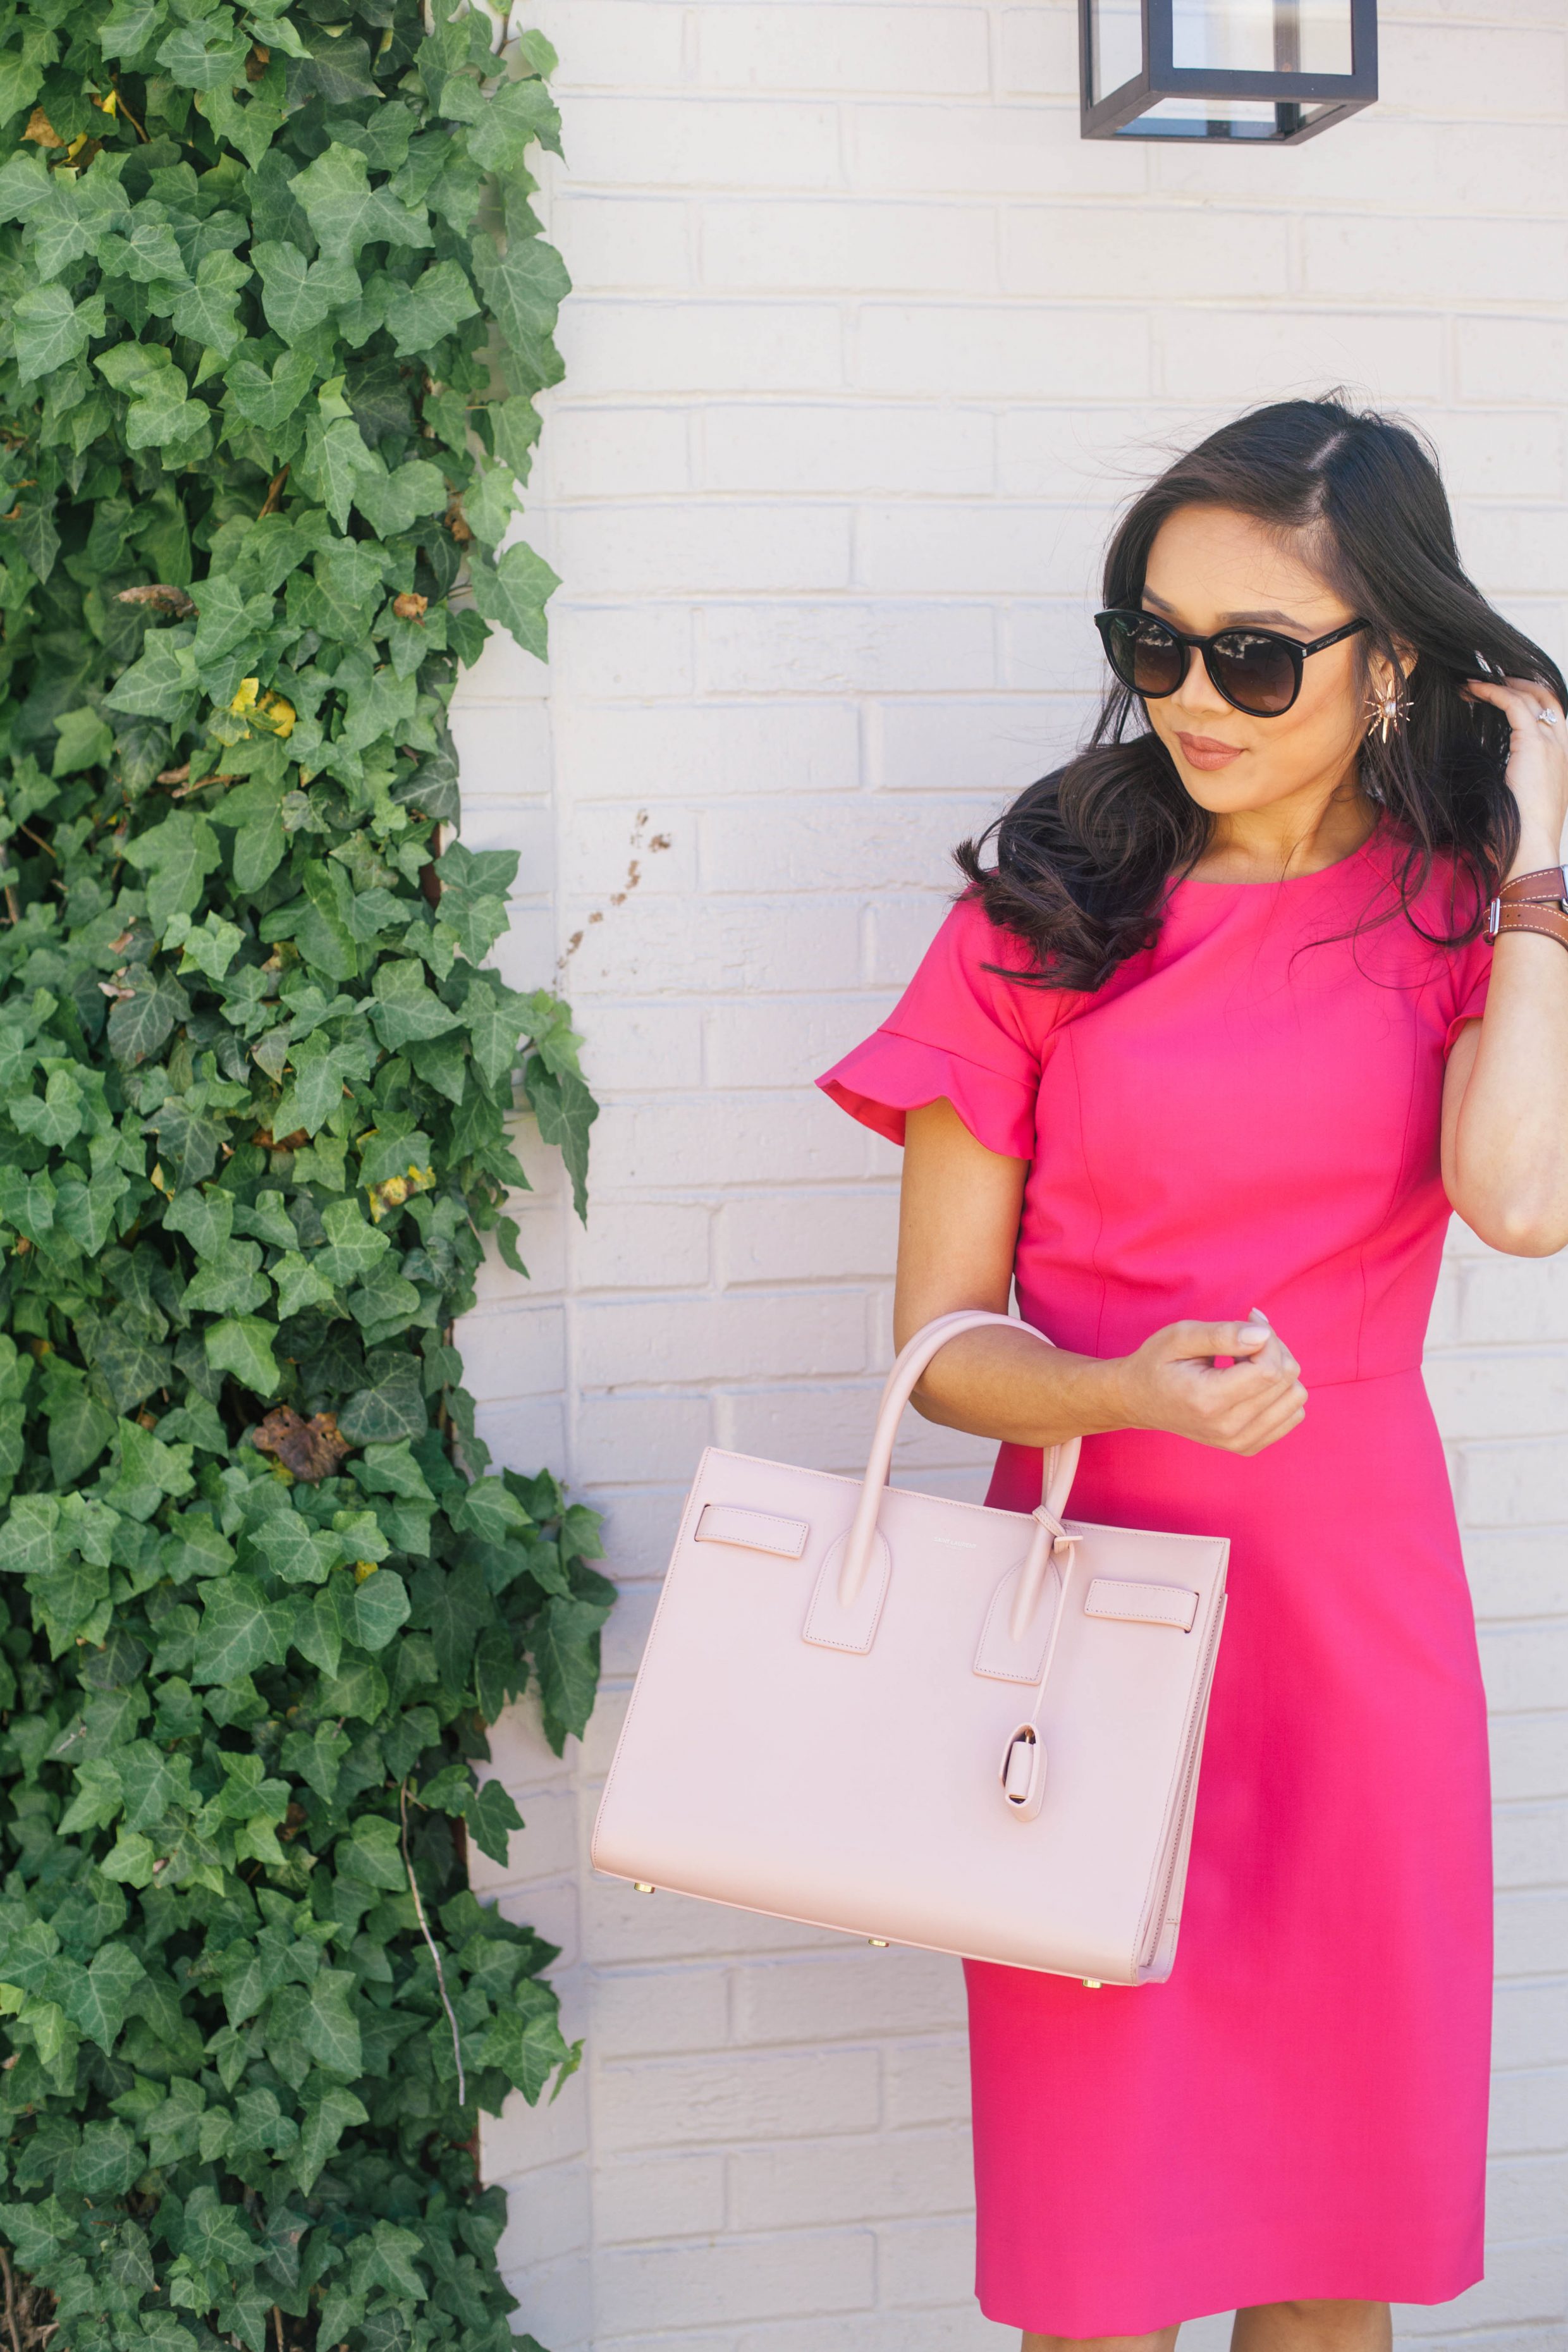 COLOR & CHIC | Hot Pink Ruffle Sleeve Dress for Work with Saint Laurent Sac de Jour